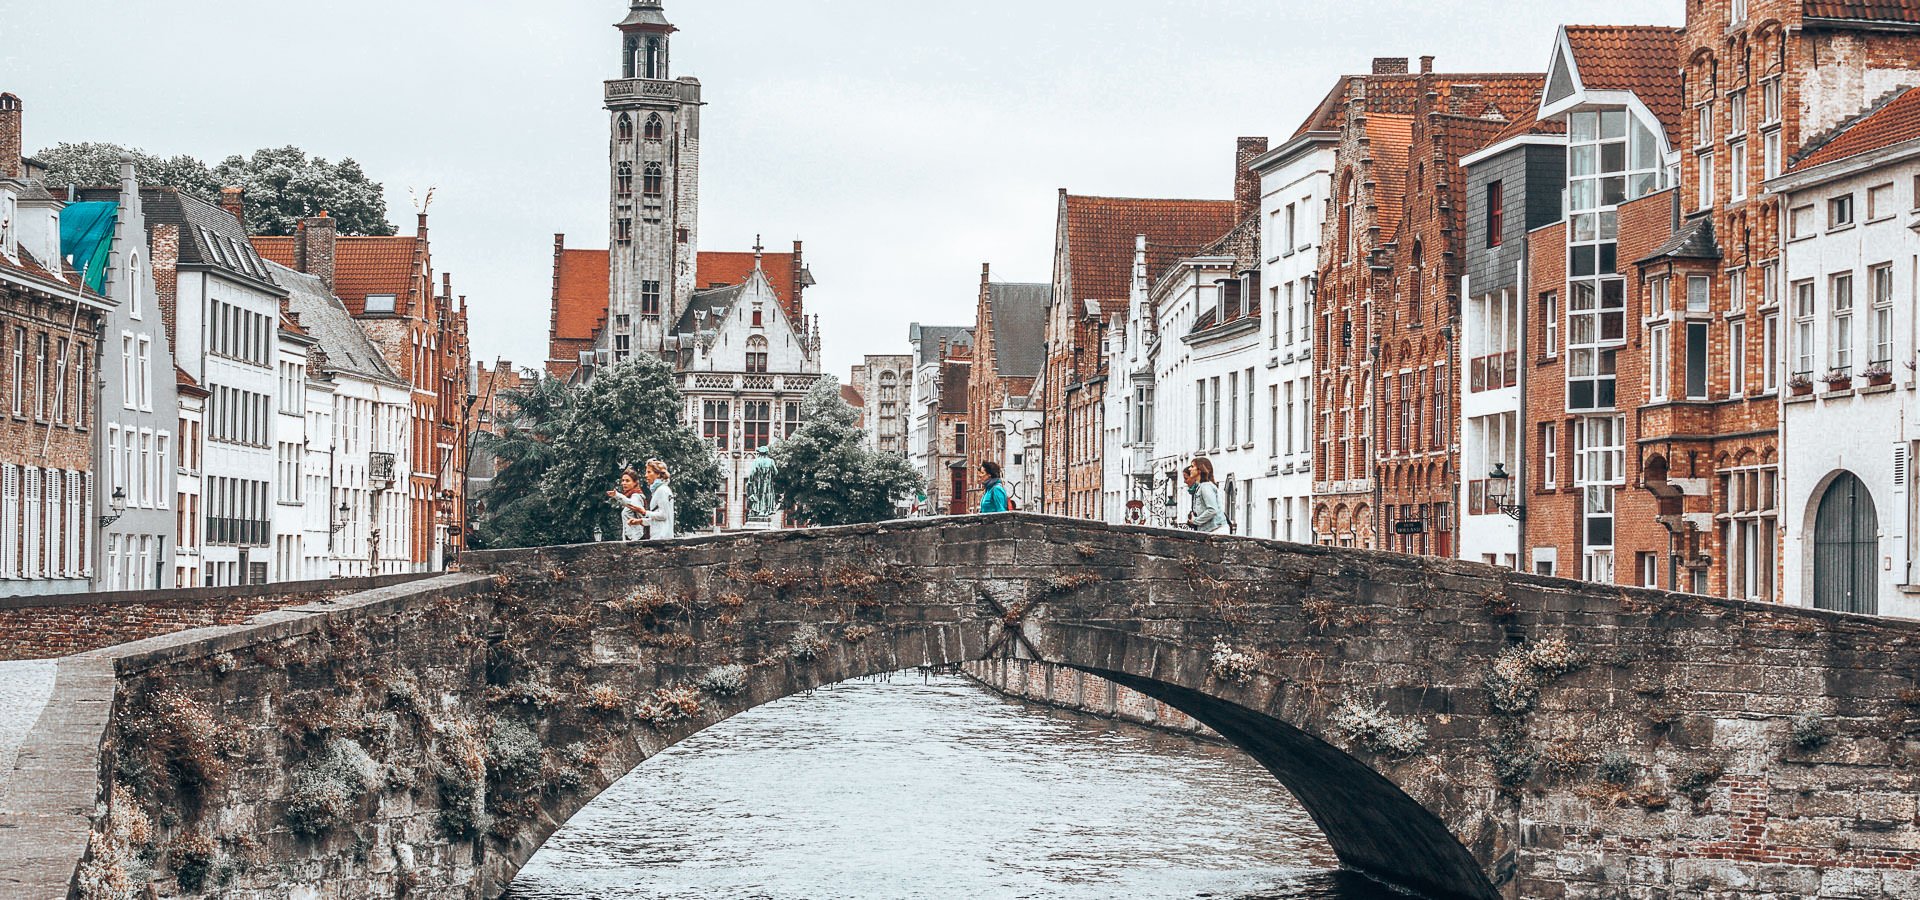 A Complete Guide To 24 Hours In Bruges | 3 days in lisbon 5